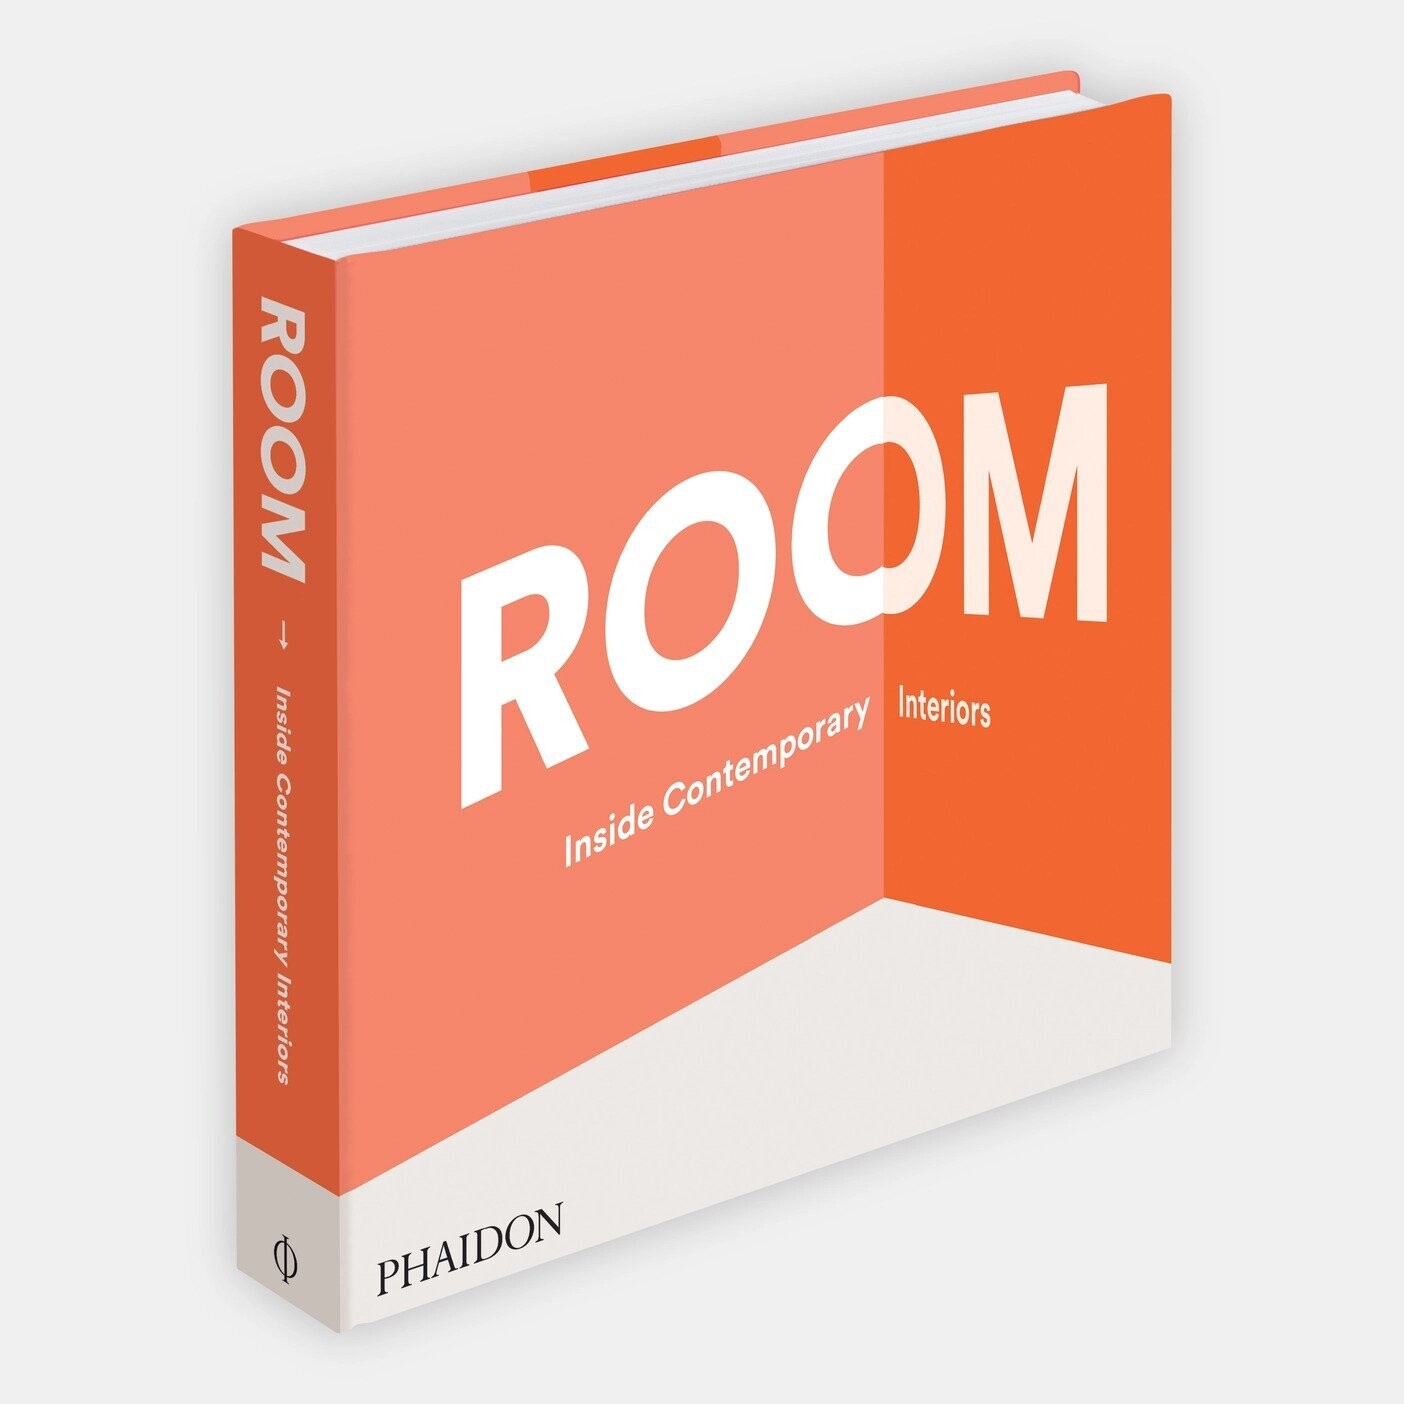 Phaidon - Room: Inside Contemporary Interiors Conceived and edited by Phaidon Editors